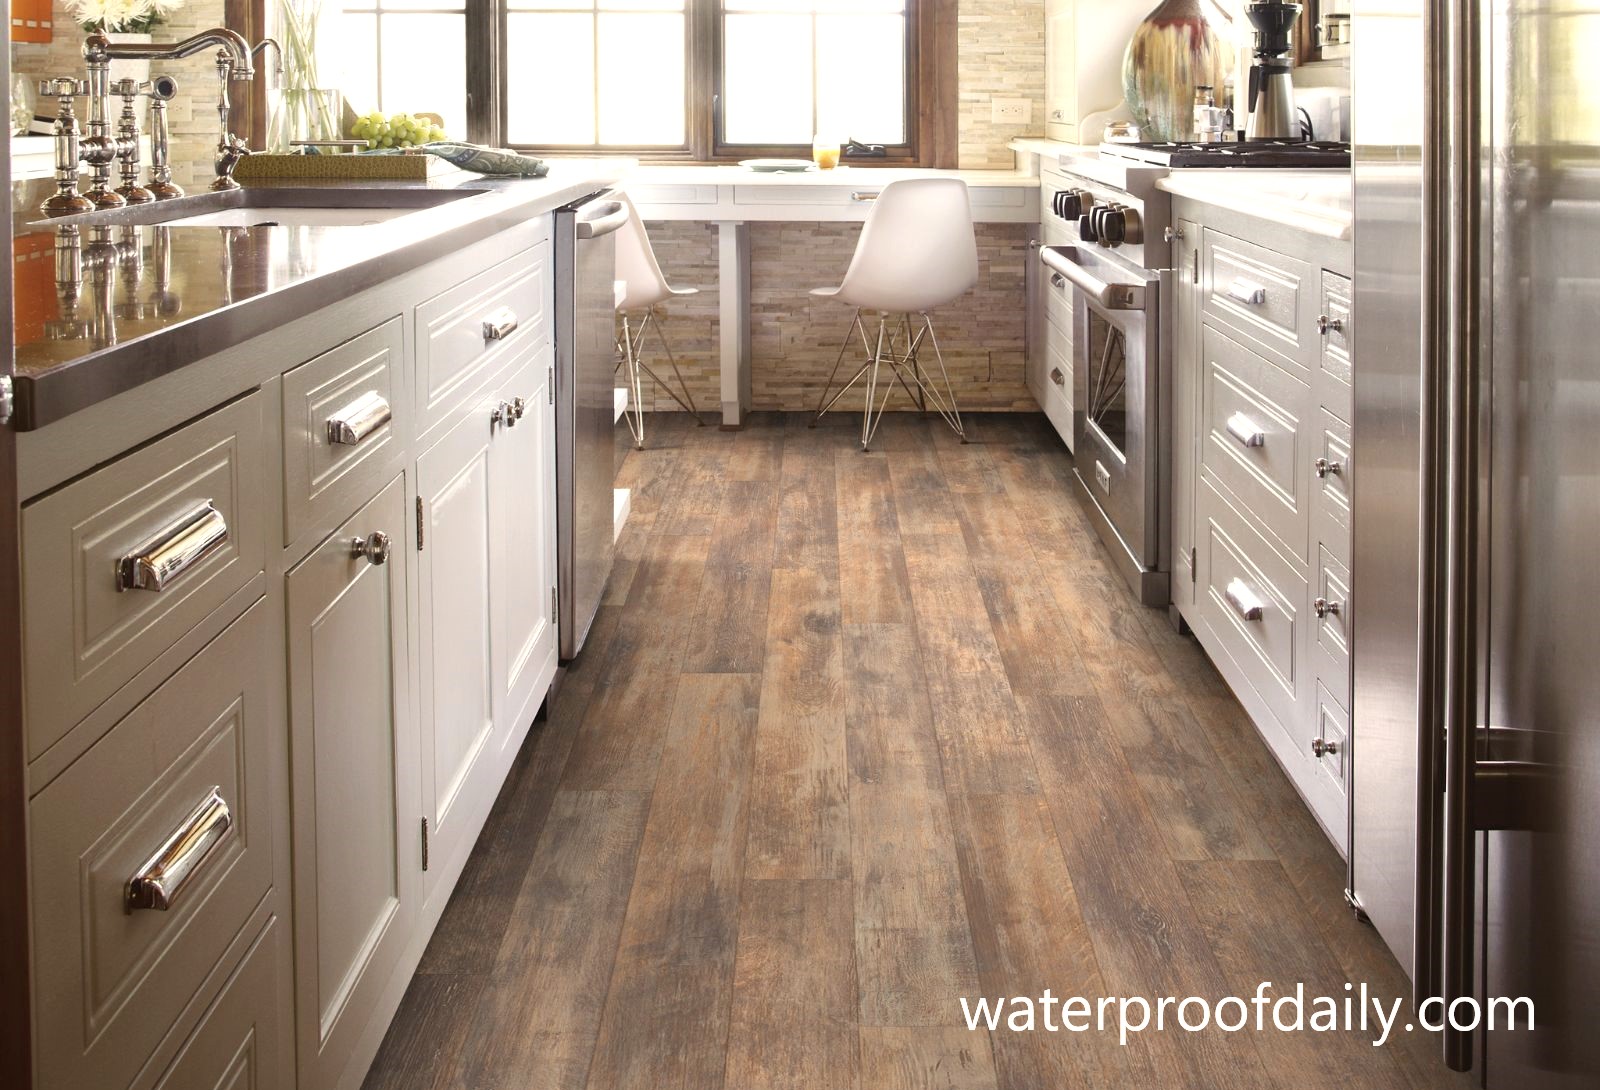 The 12 Best Waterproof Flooring for Kitchen 2021 (Reviews & Guide)